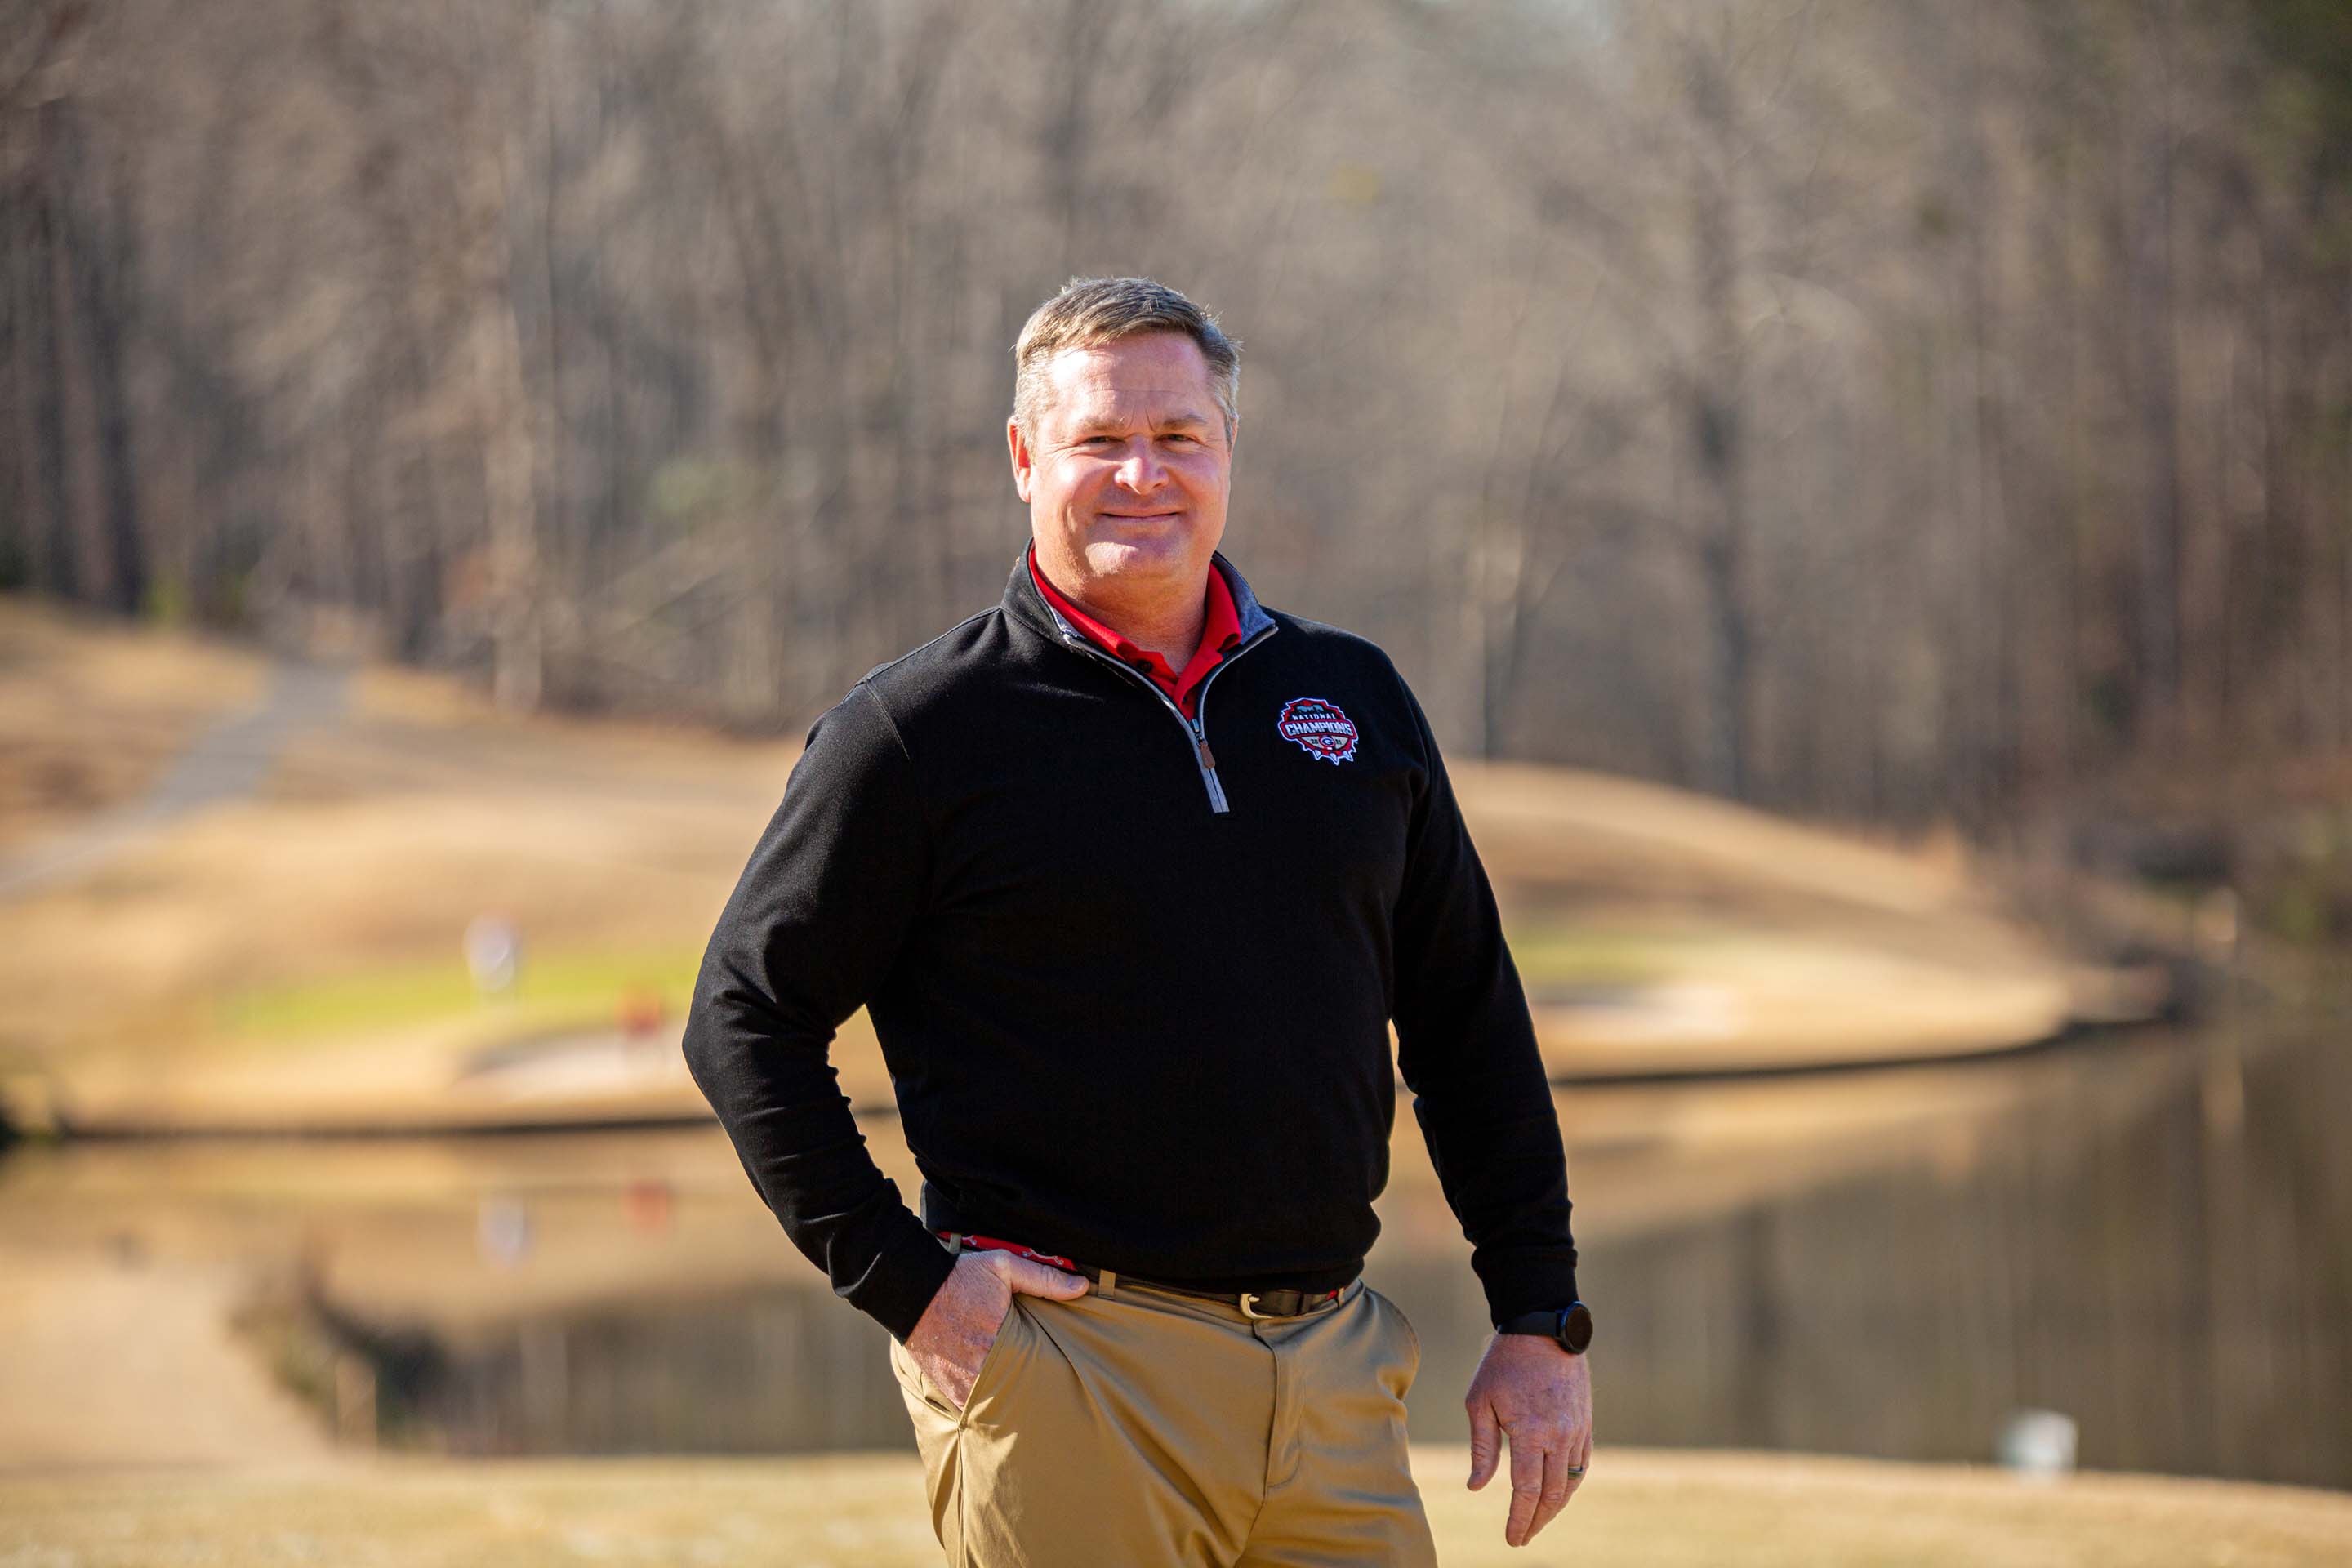 A photograph of Scott Griffith wearing a black jacket with a UGA National Champions logo patch. Behind him is a pond and a portion of the golf course green.